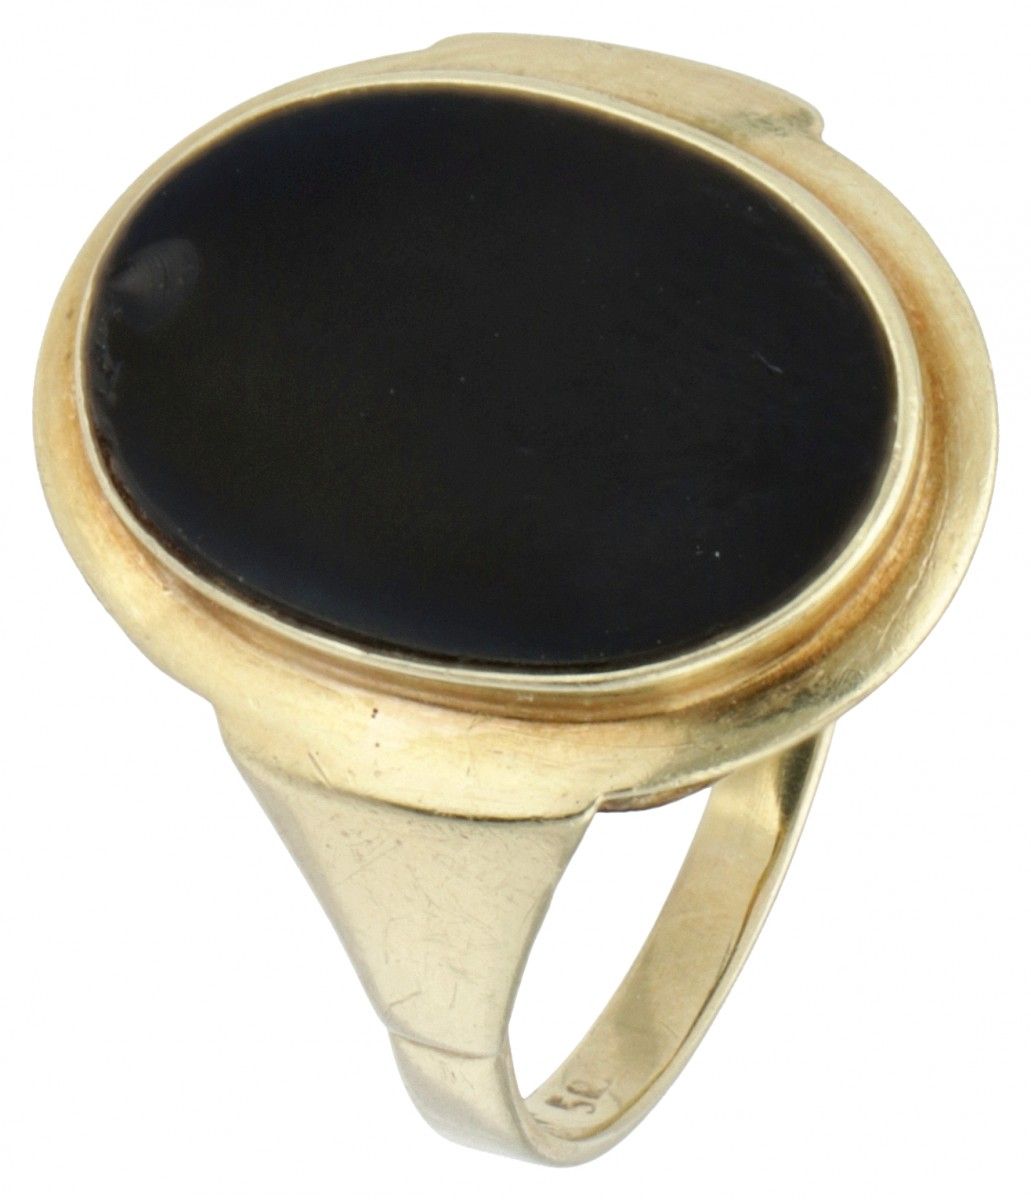 14K. Yellow gold oval signet ring set with onyx. Hallmarks: 585. Onyx approx. 13&hellip;